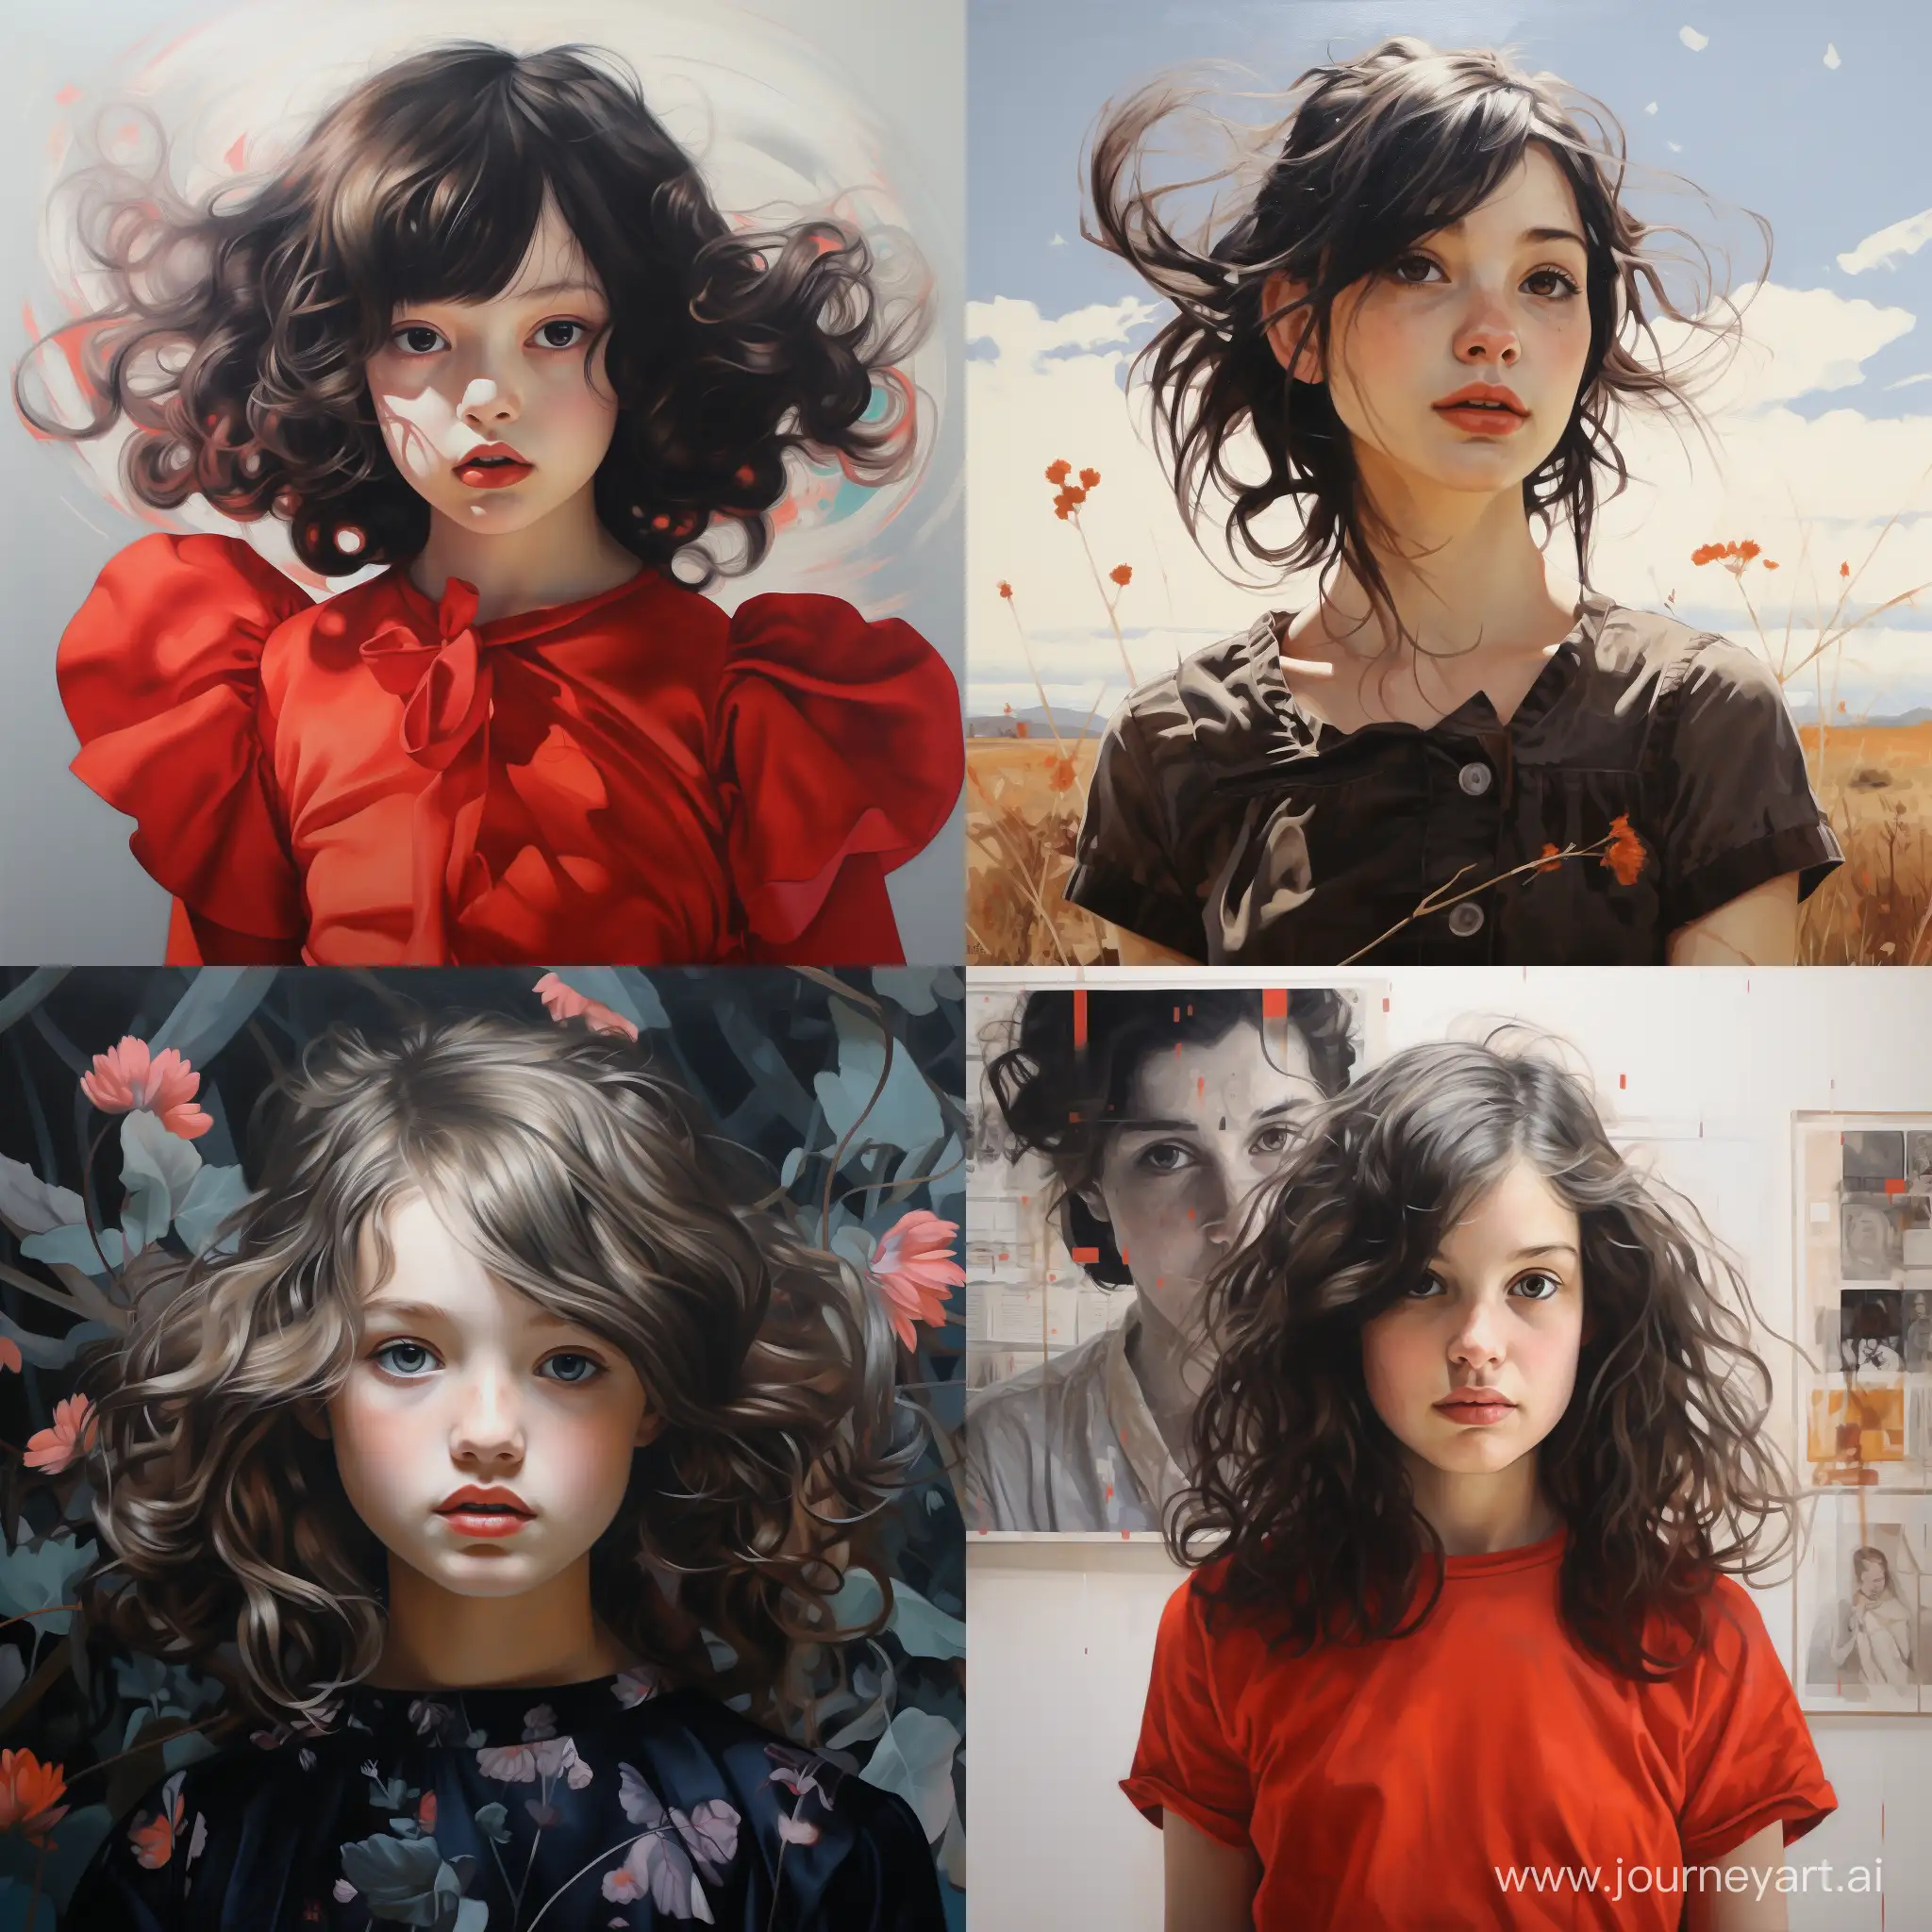 Adorable-Girl-with-a-Mysterious-Aura-Square-Art-Image-58589